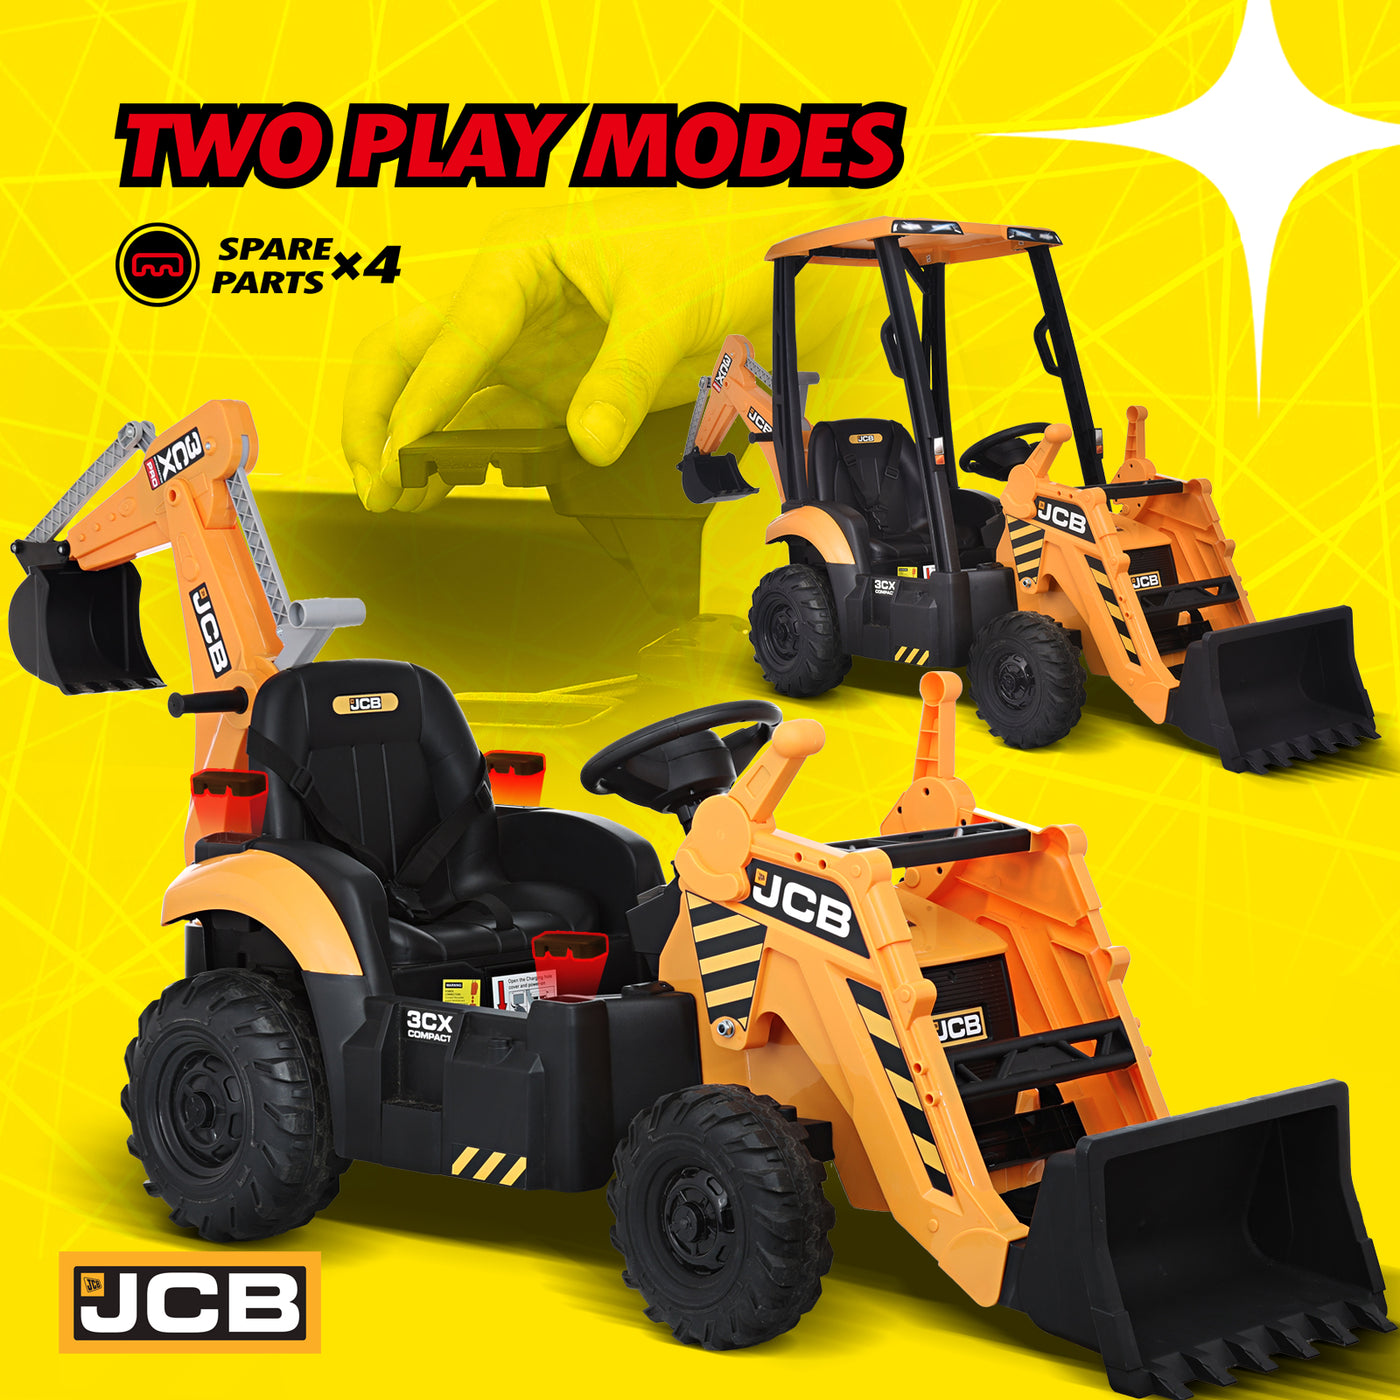 Blitzshark 2 in 1 Kids Ride on Excavator & Bulldozer 12V Battery Powered Motorized Car Electric Construction Vehicles for Kids Ages 3-6, with Front Loader, Digger, Ceiling, Remote Control, Yellow